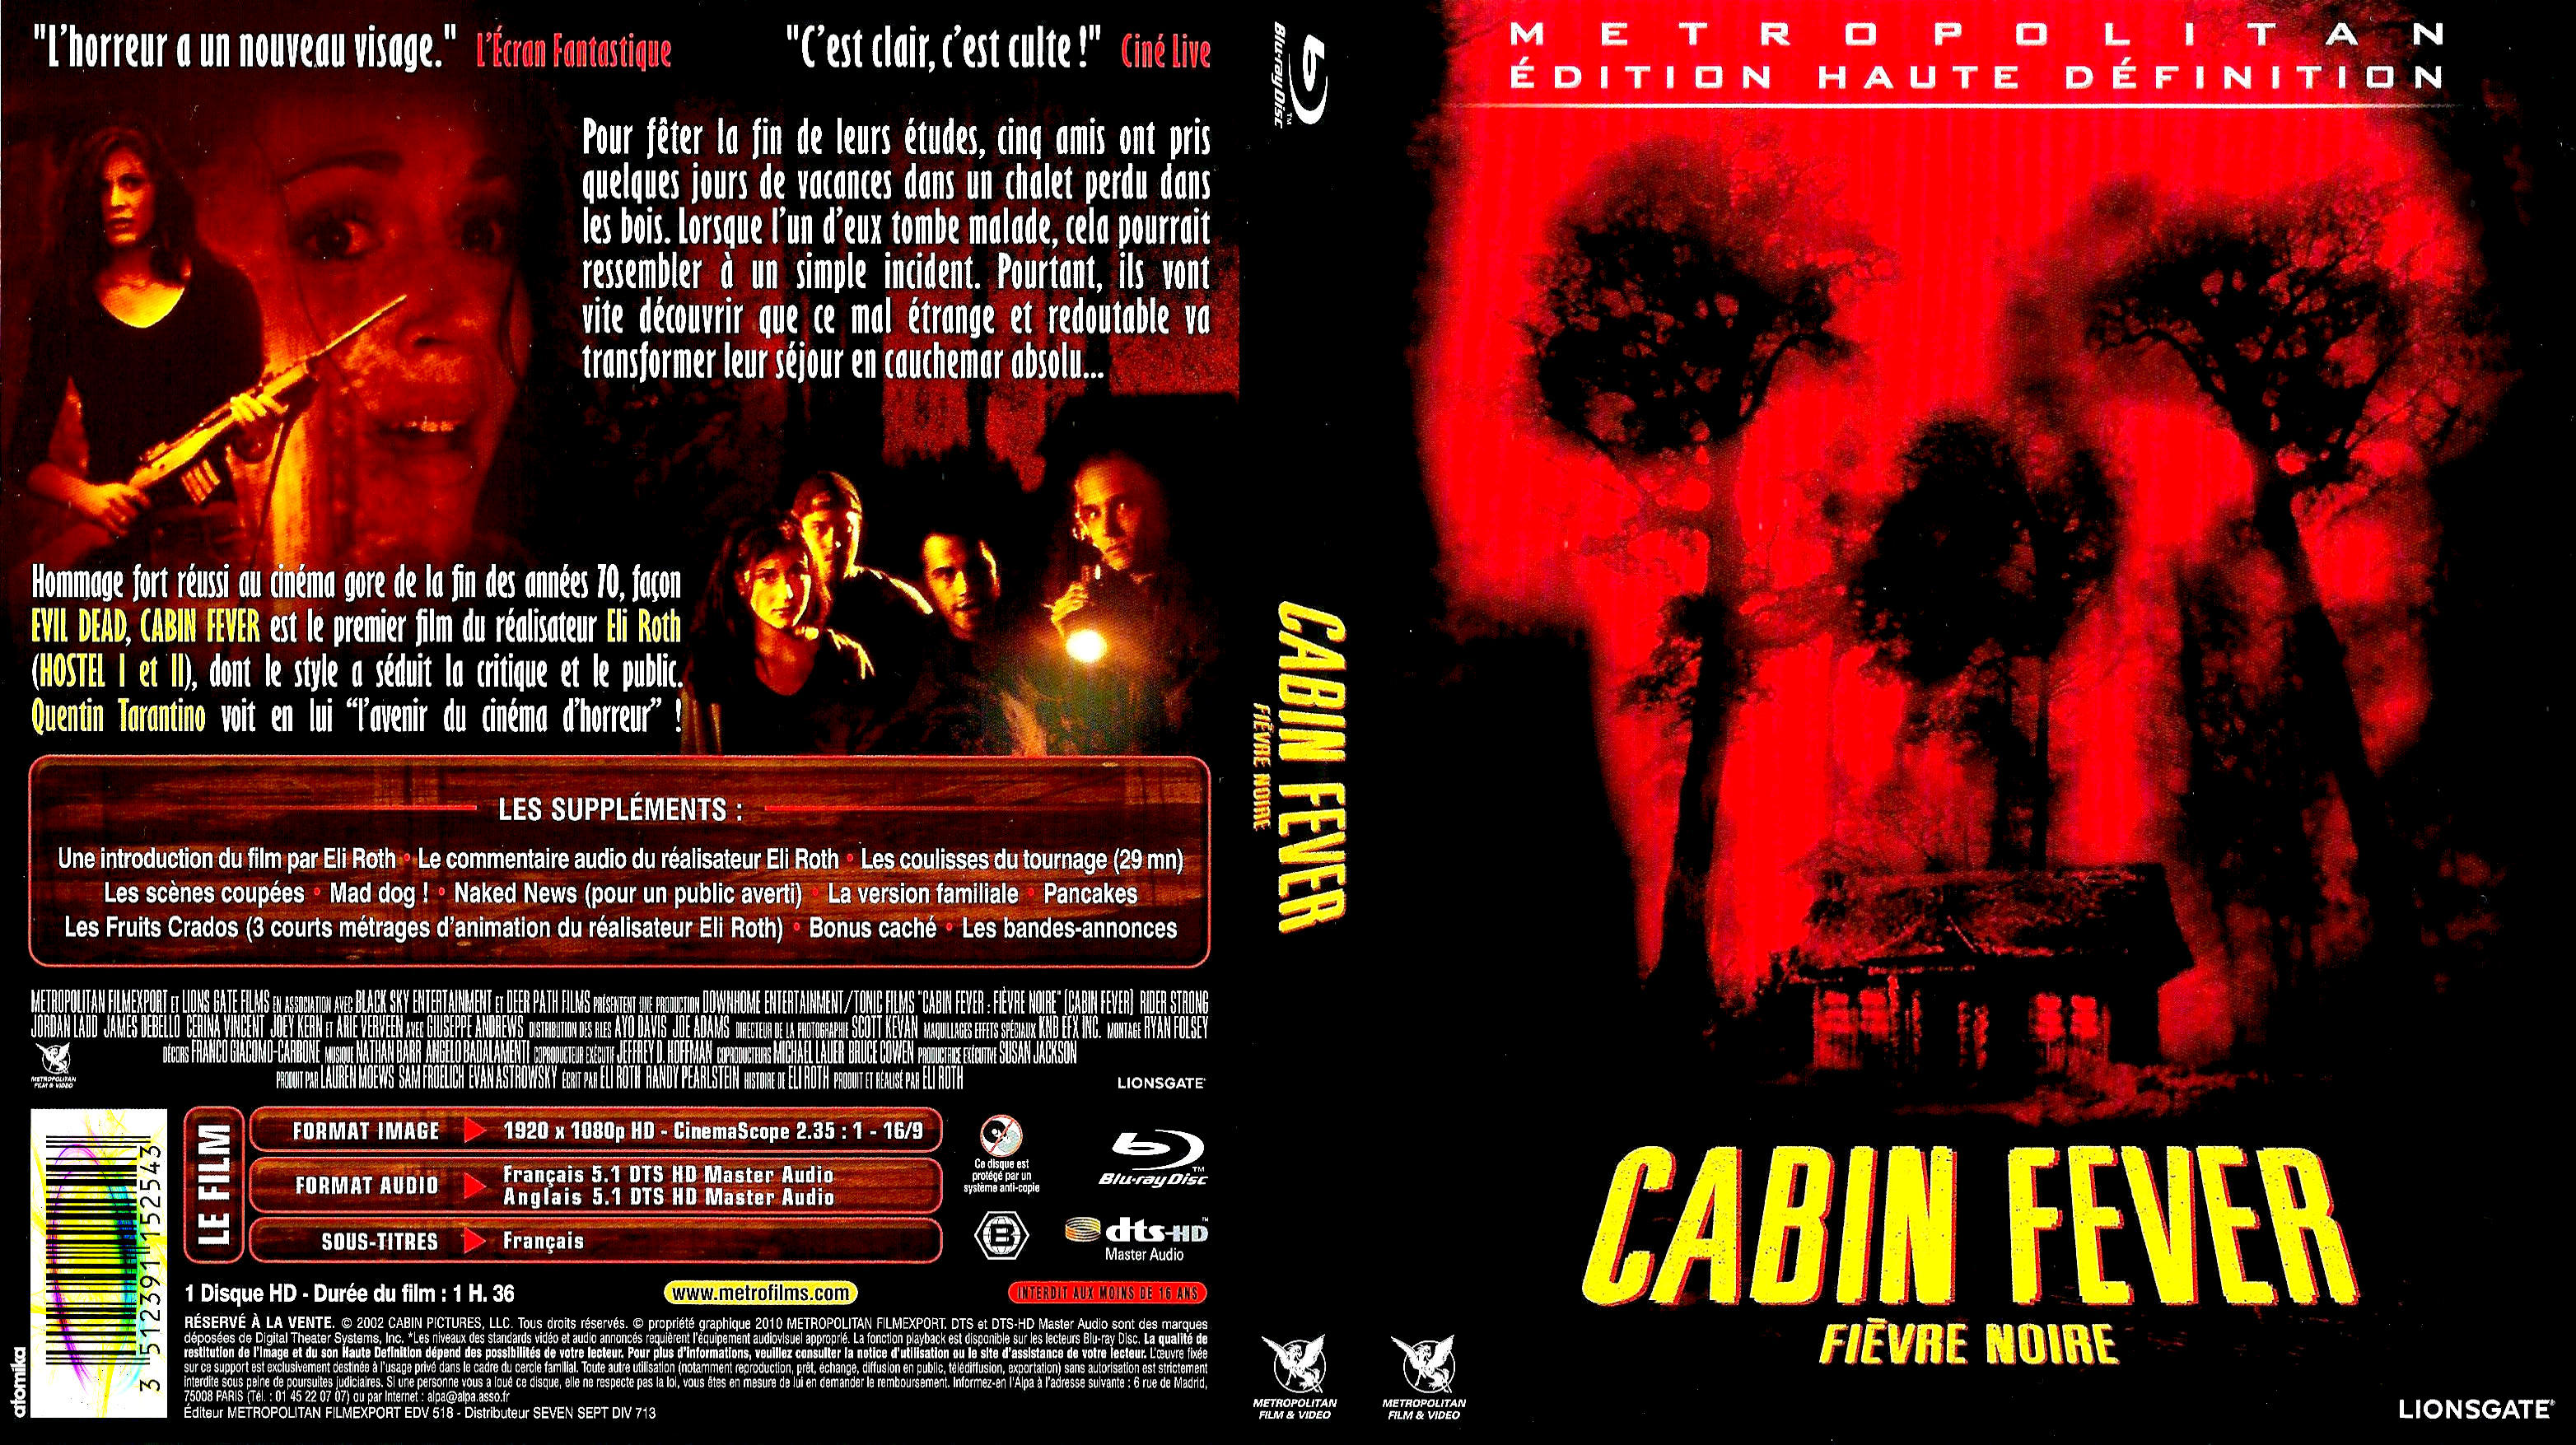 Jaquette DVD Cabin fever (BLU-RAY) 